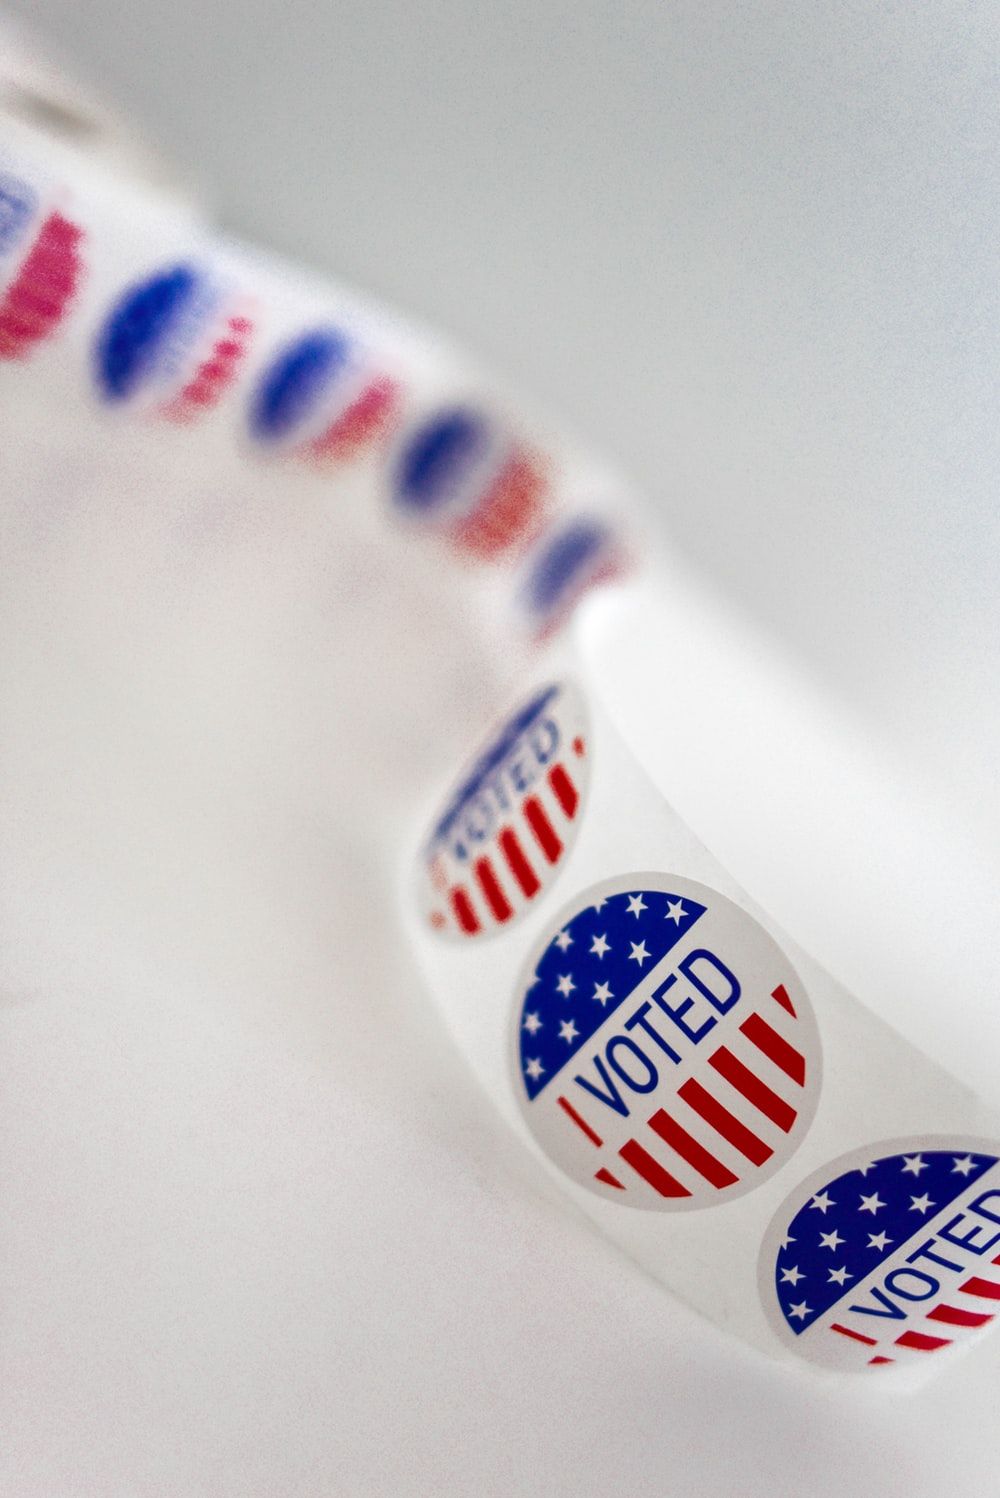 Vote Picture [HD]. Download Free Image for Election Day